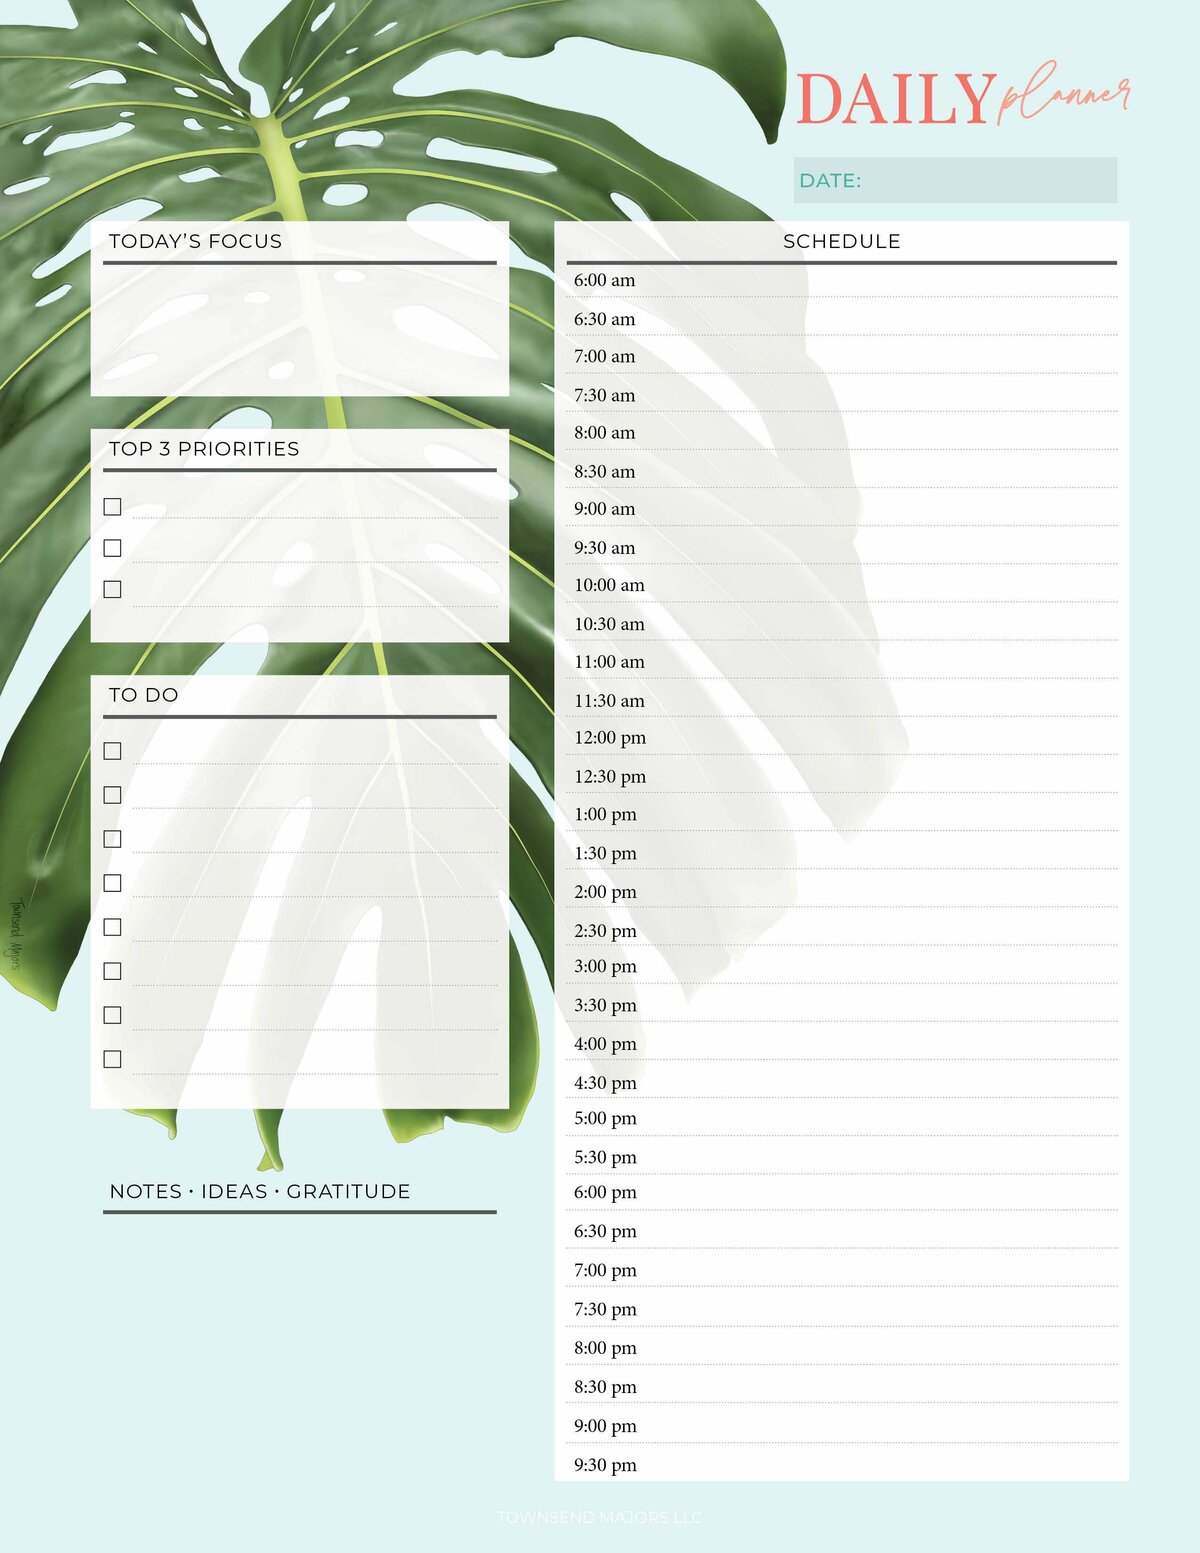 townsend-majors-daily-planner-monstera